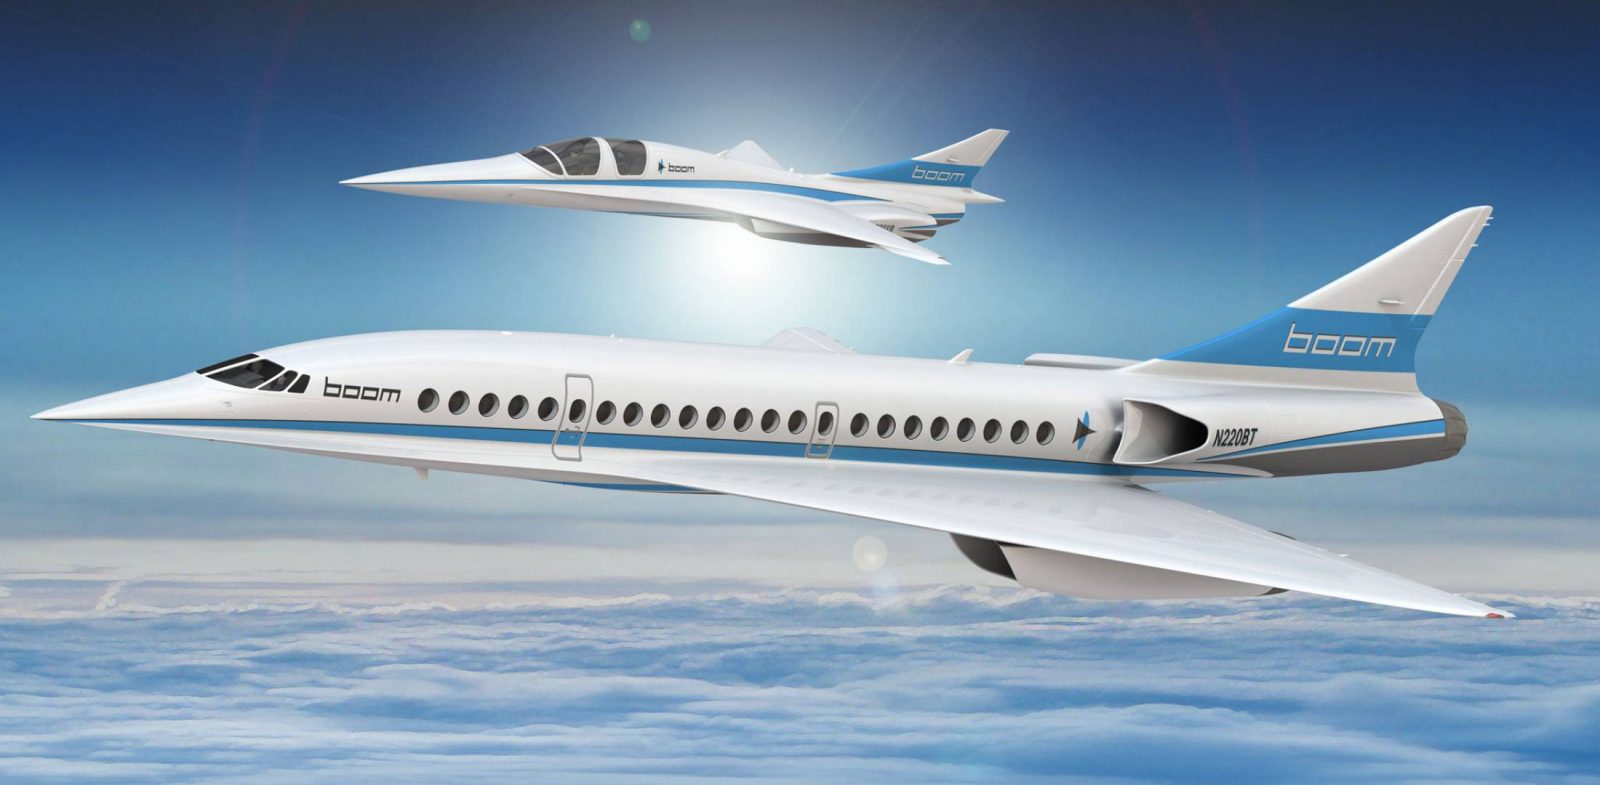 Fastest Passenger Airplanes In The World